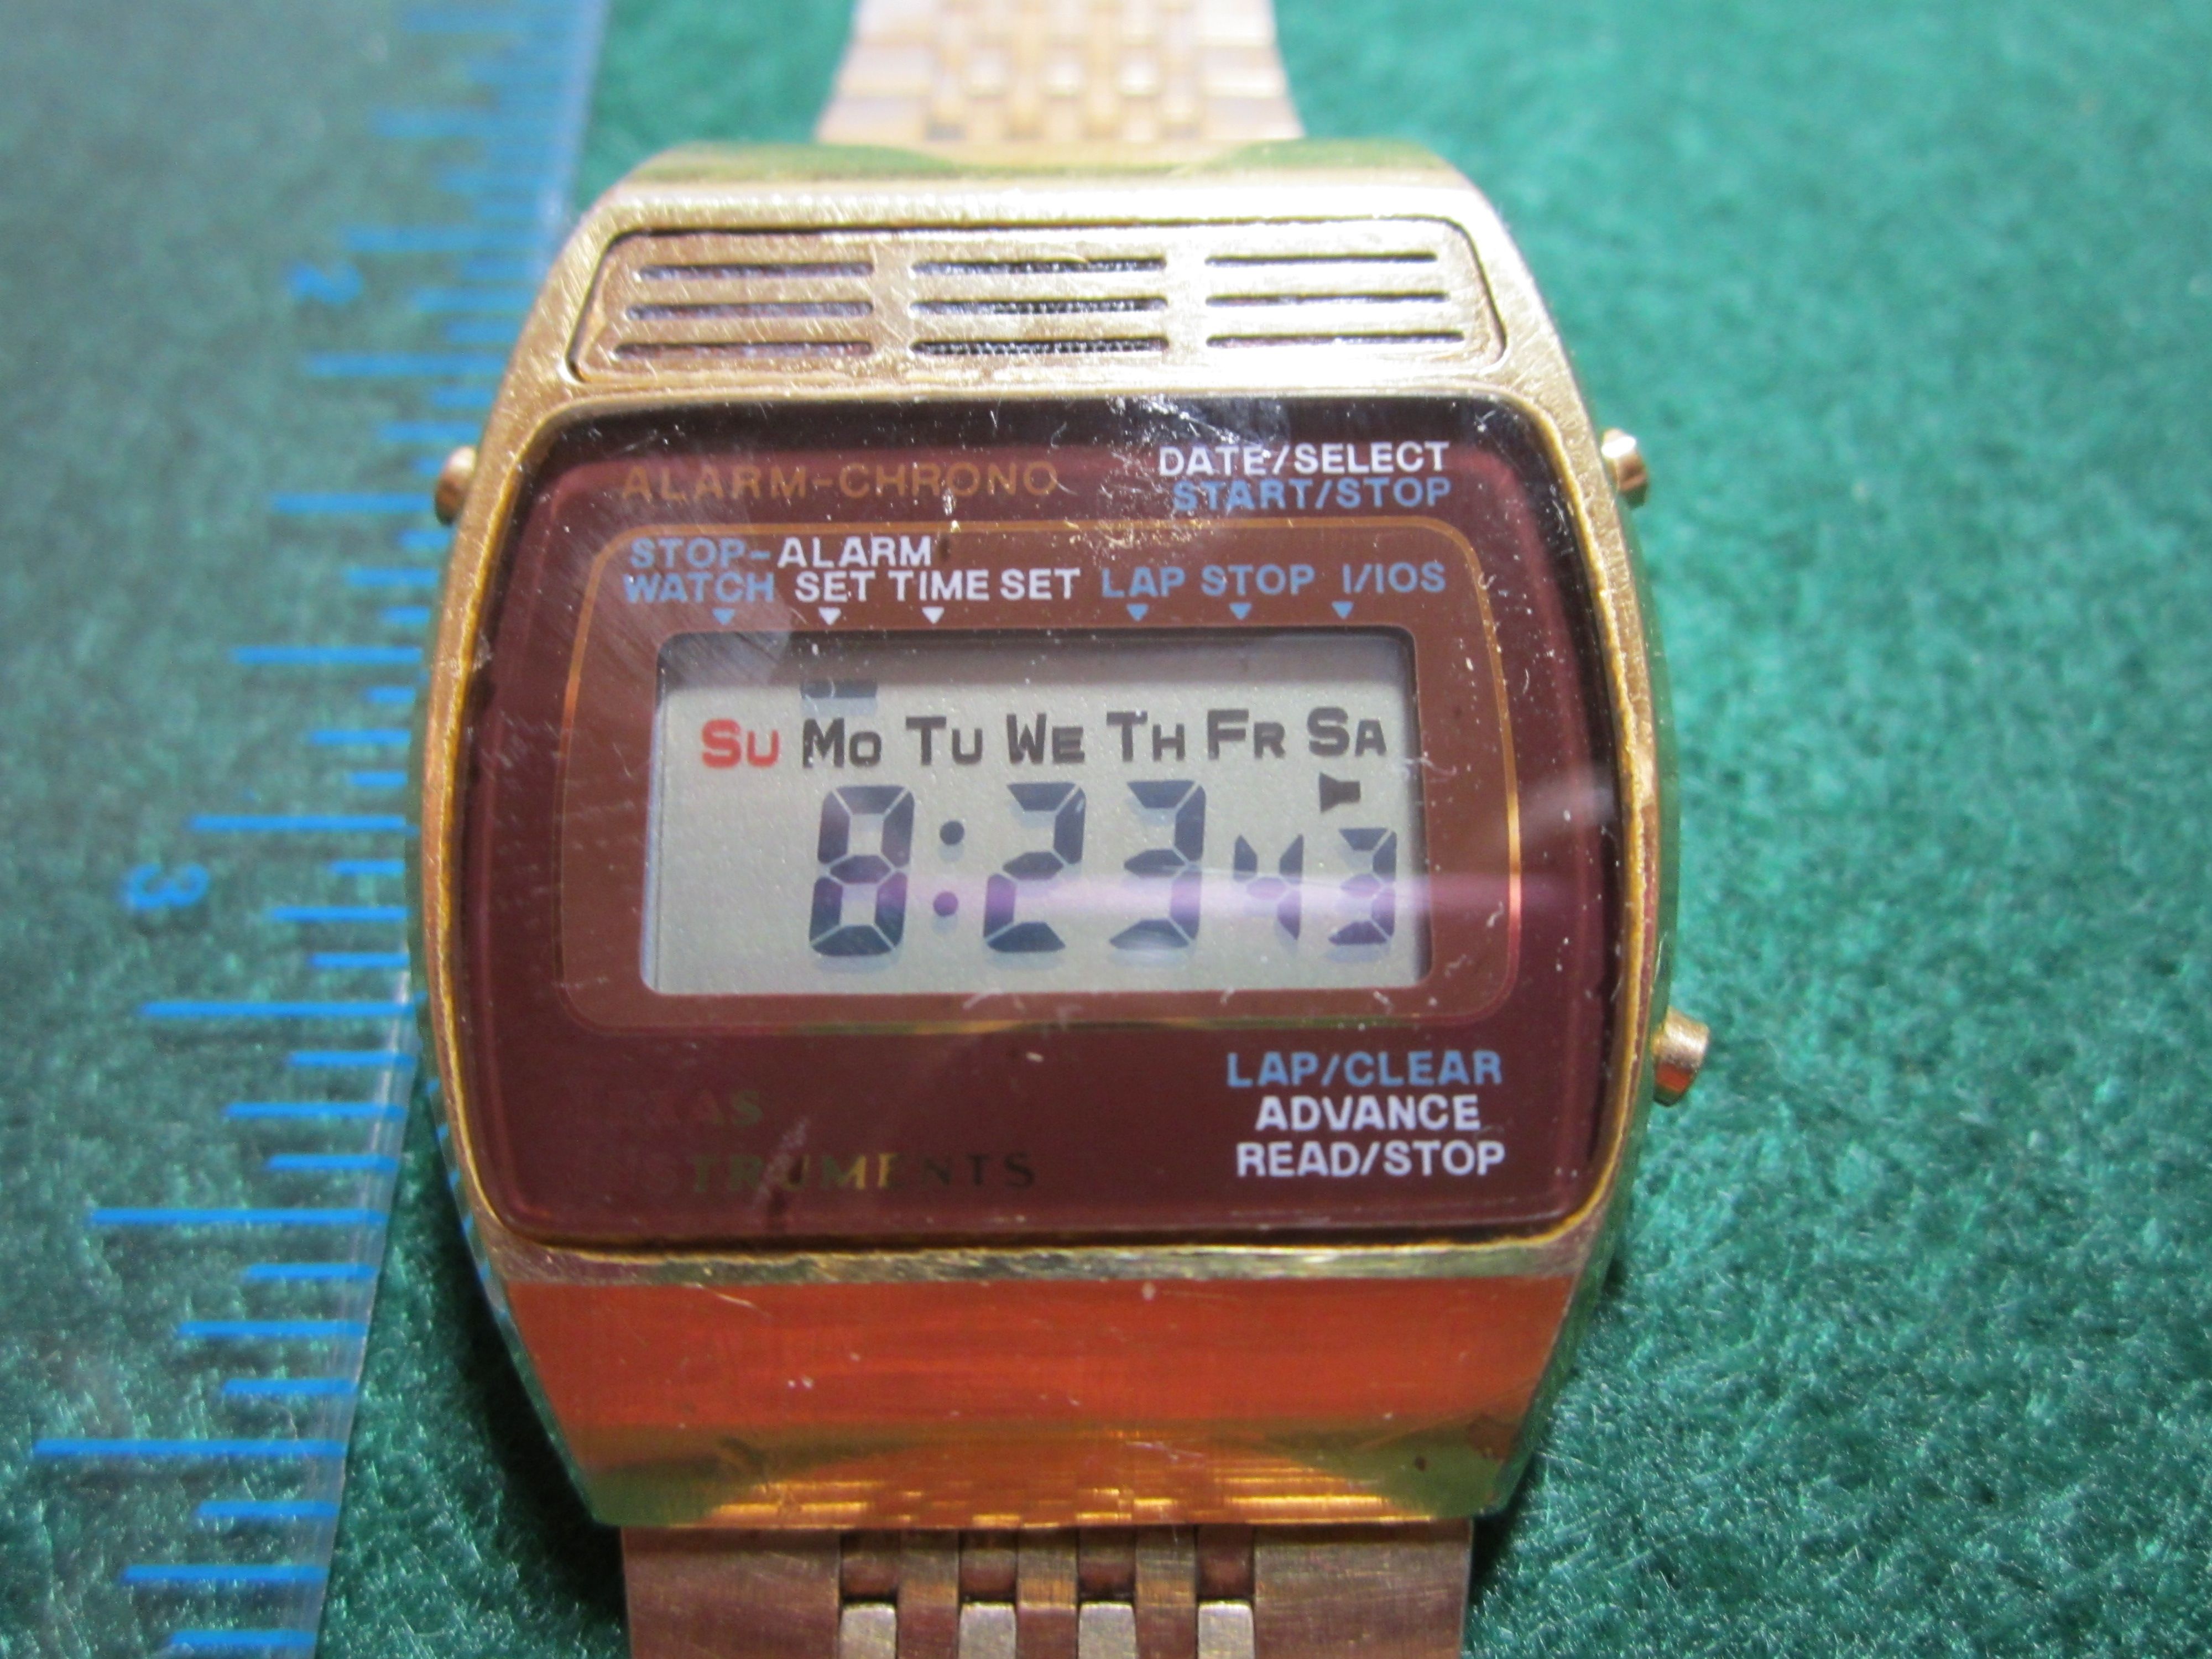 TI Digital watch 1976. TI made the first digital watch. This one was made around 1976 and works fine after putting a batter. I love wearing this watch